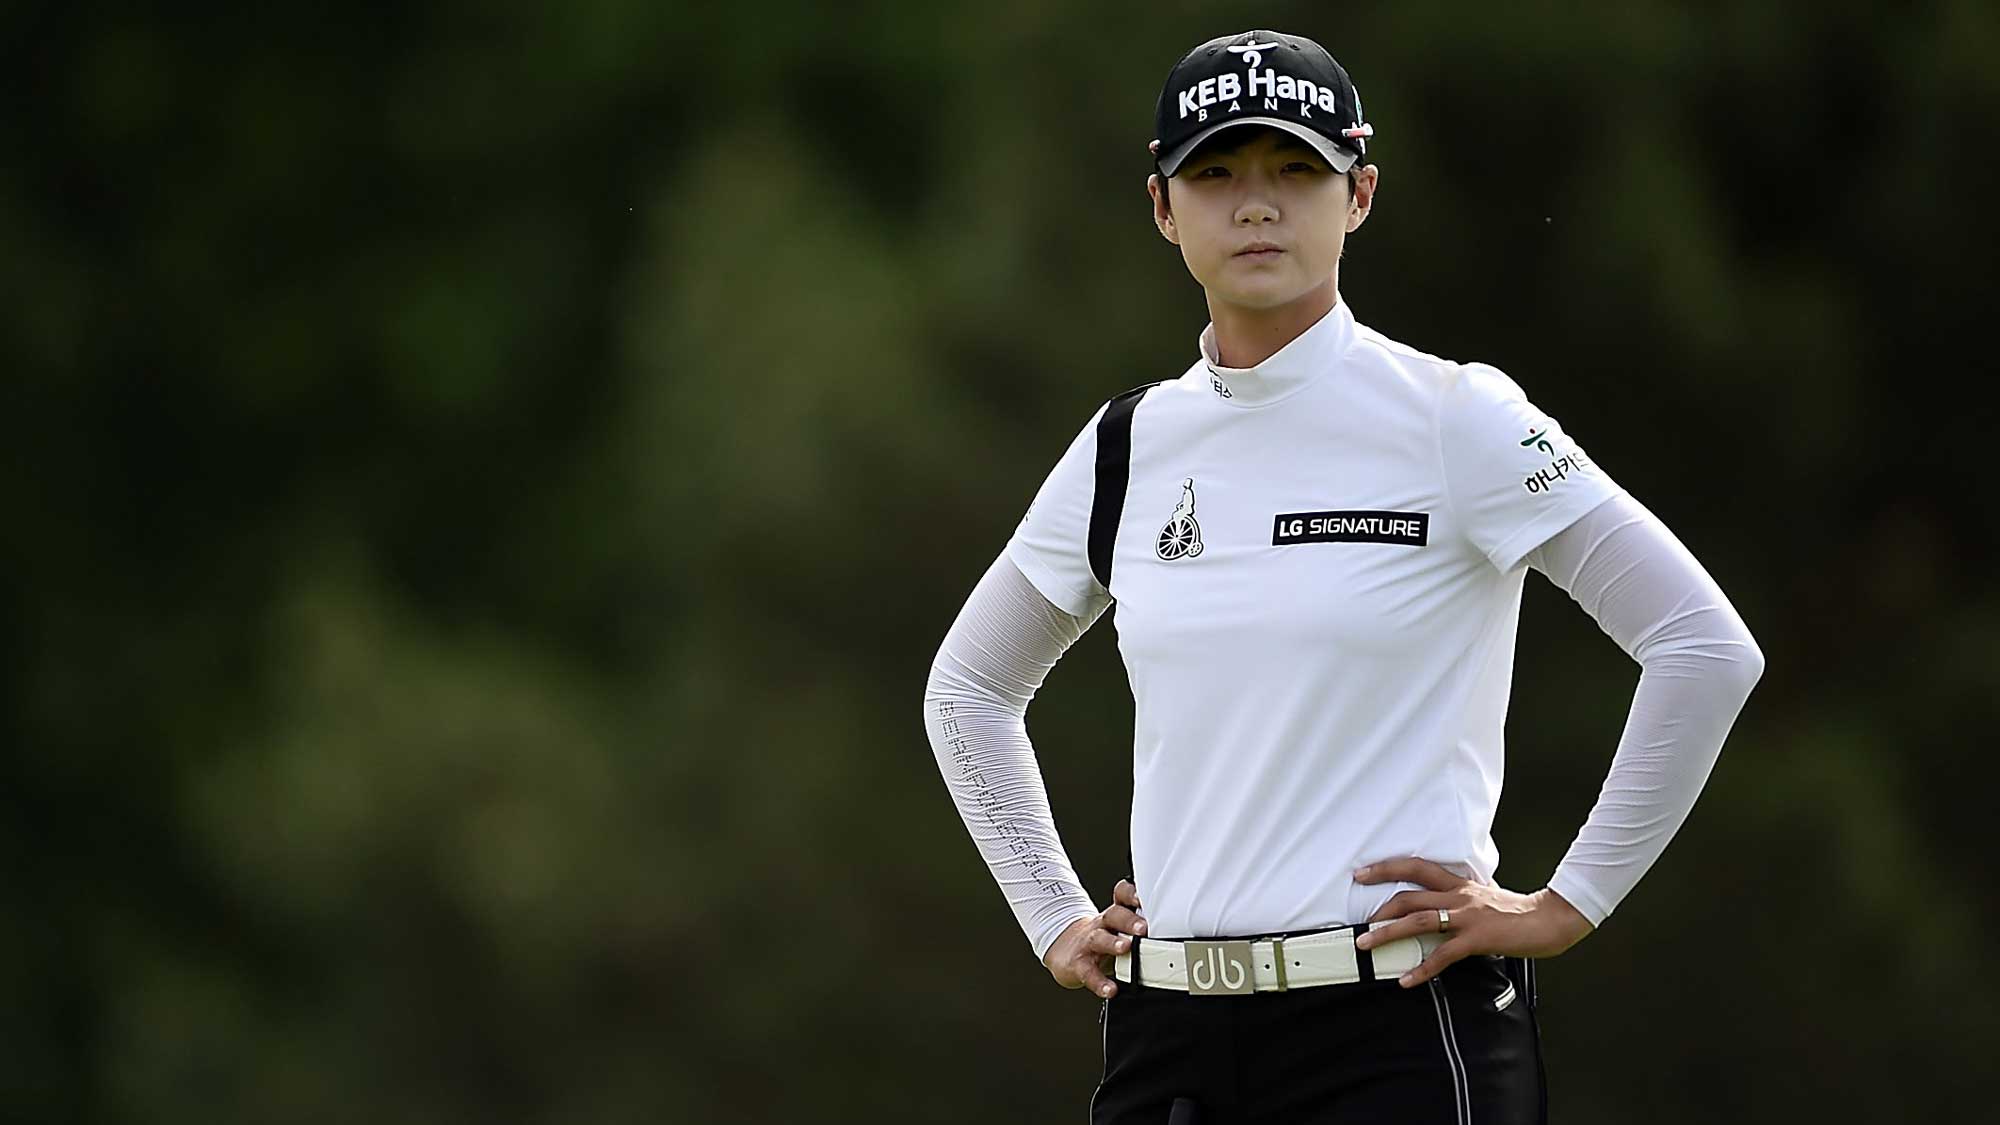 Sung Hyun Park of South Korea waits to putt on the 17th green during the second round of the Meijer LPGA Classic